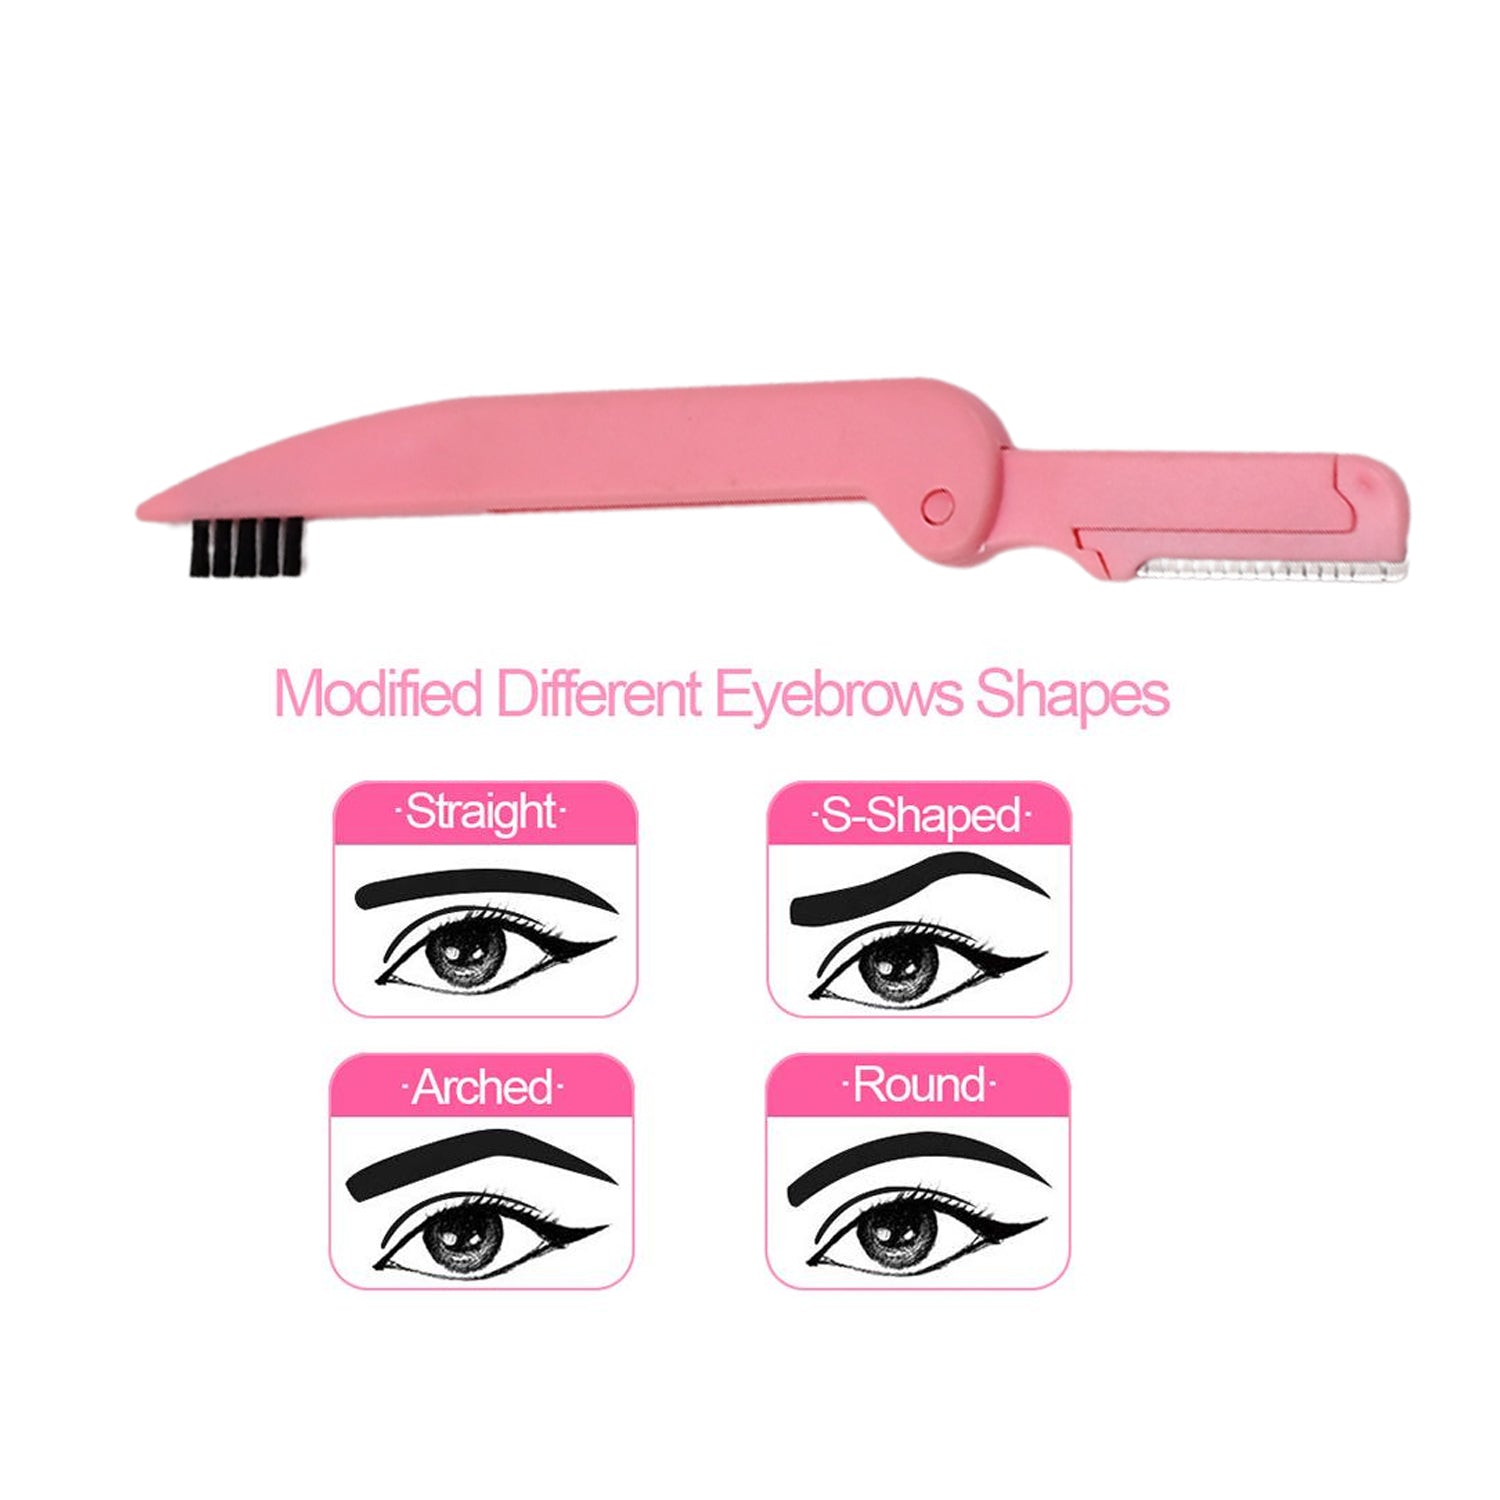 6648 3 in 1 Foldable Eyebrow Brush and Lash Comb,Double Ended Brow Brush Makeup Brush DeoDap